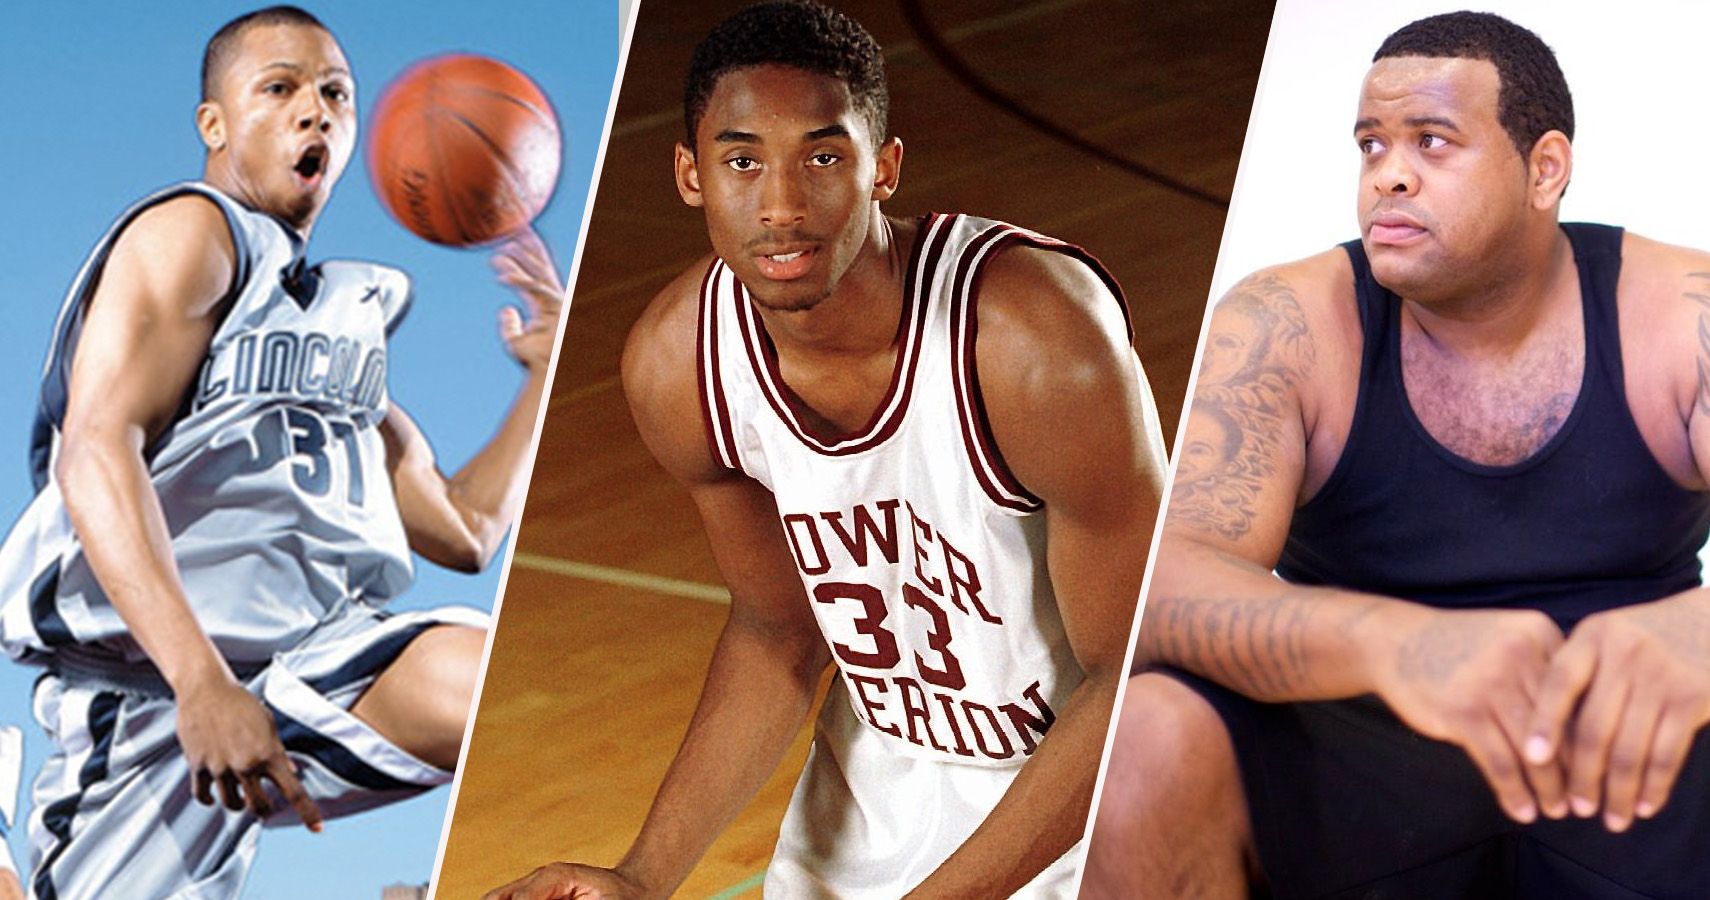 Local high school hoops stars who've gone on to the NBA